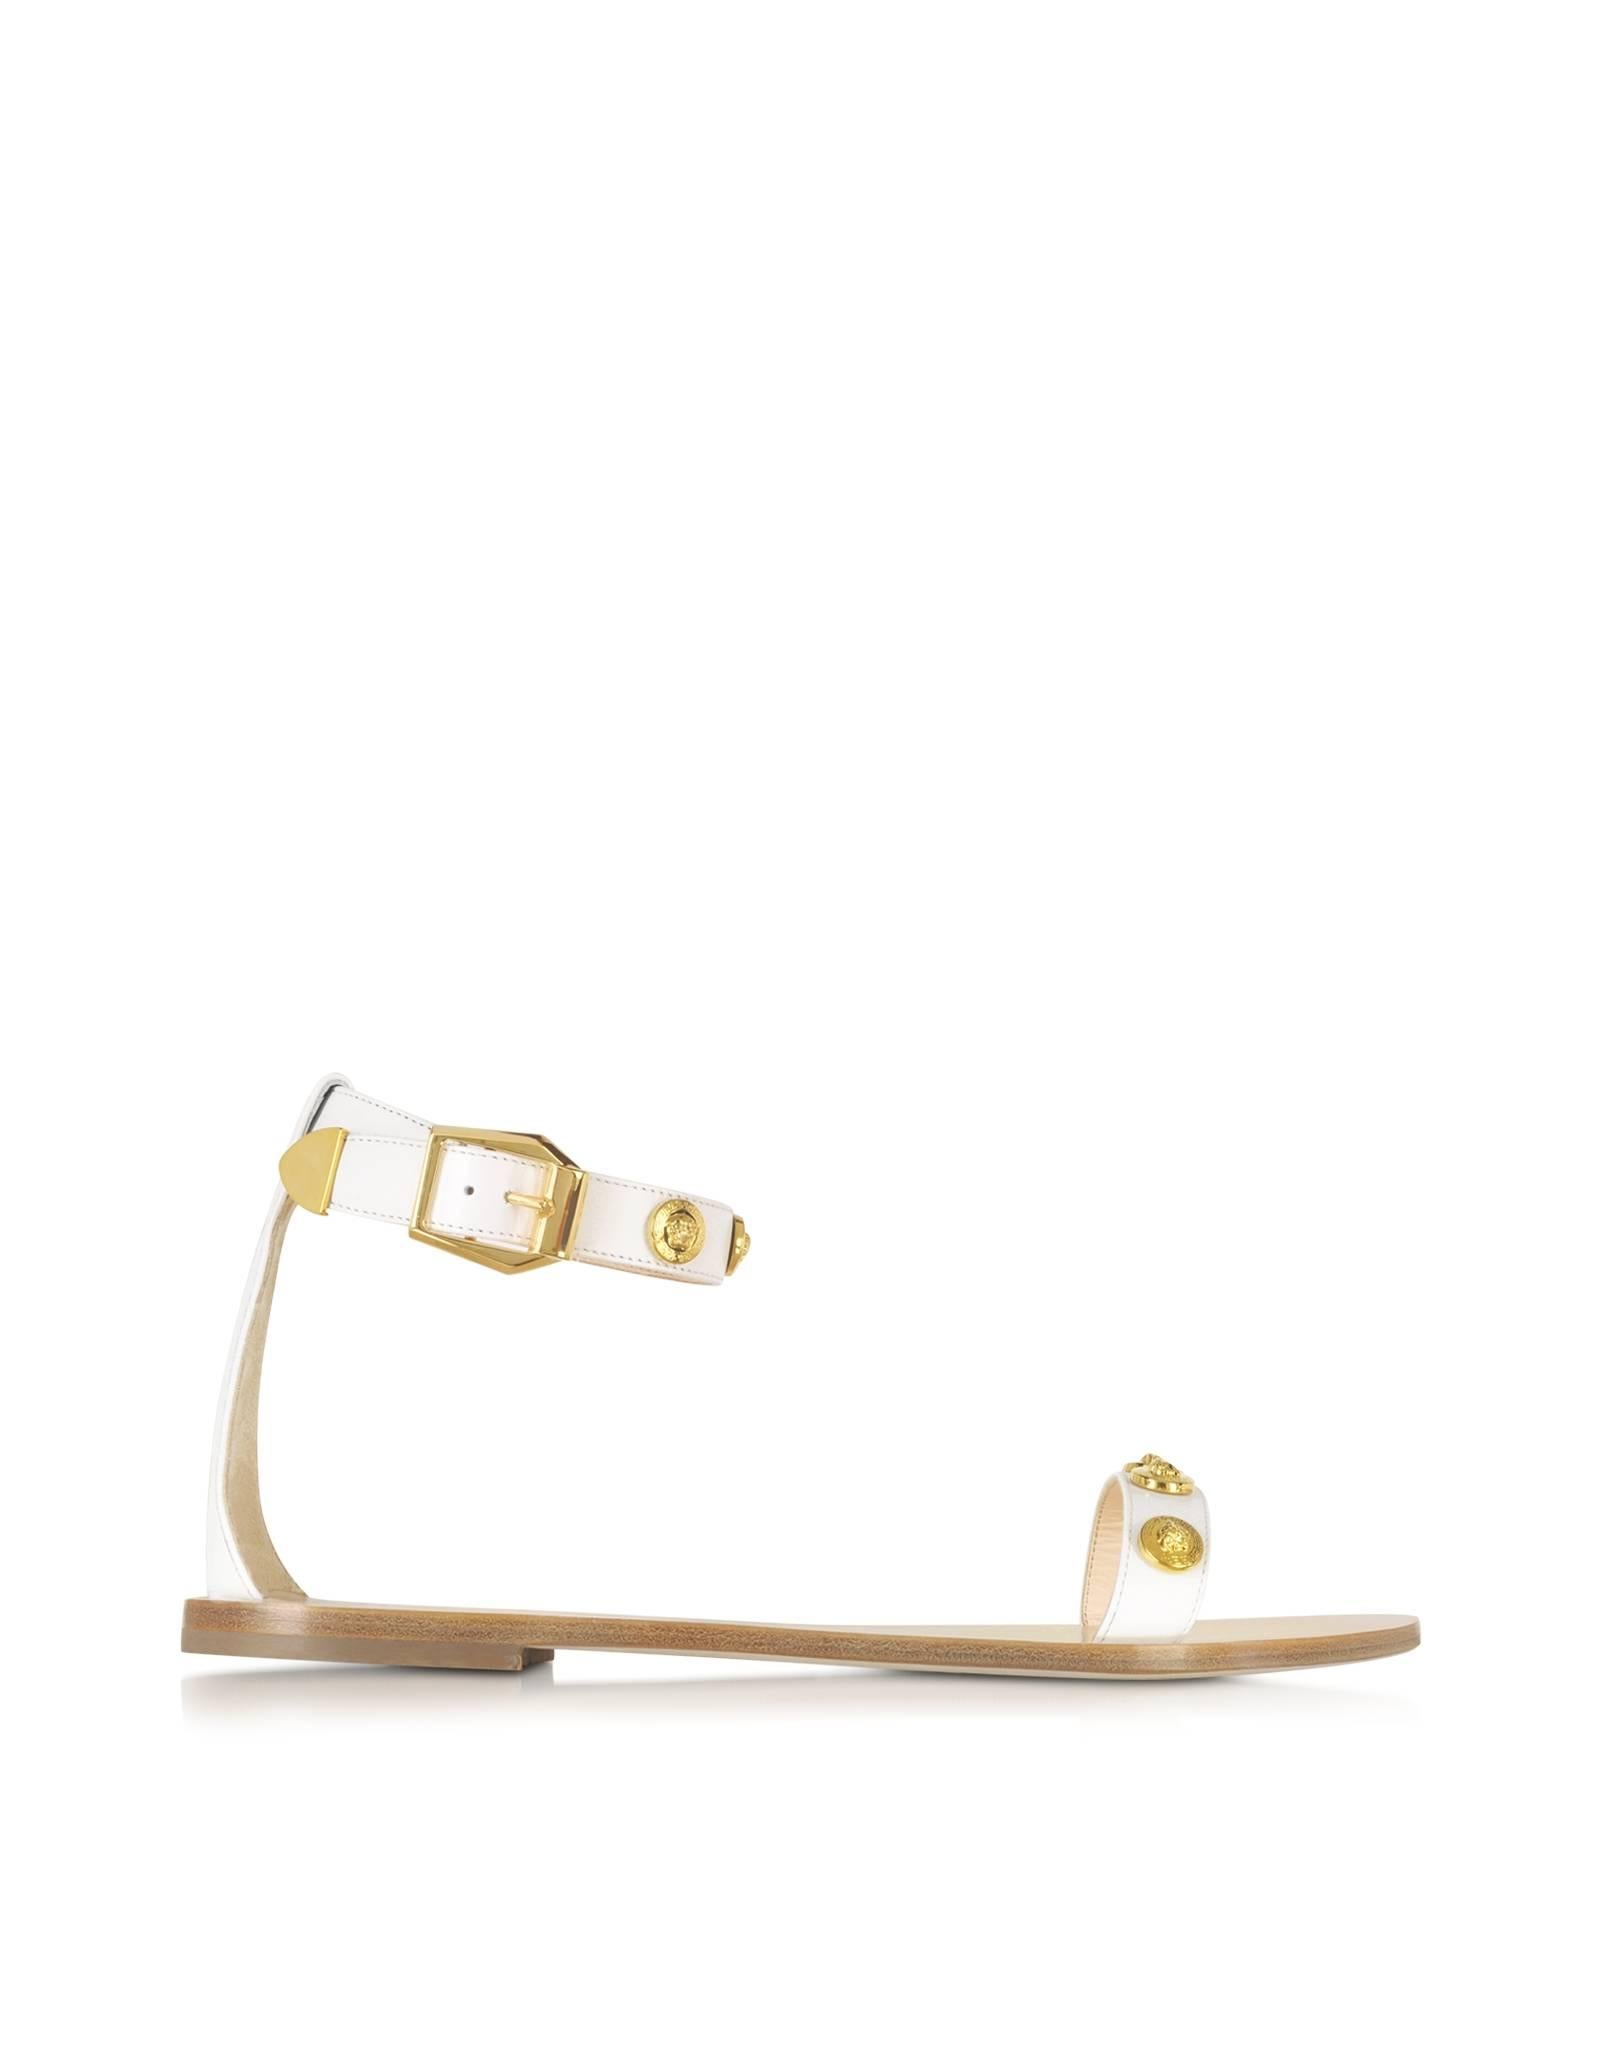 VERSACE 

SOLD OUT EVERYWHERE!!!

Ankle strap sandals

These sandals from Versace featuring Medusa gold metallic studs, open round toe, buckle fastening ankle strap.

100% leather
 
IT Sizes:  35.5, 38

Made in Italy

Brand new. In VERSACE box